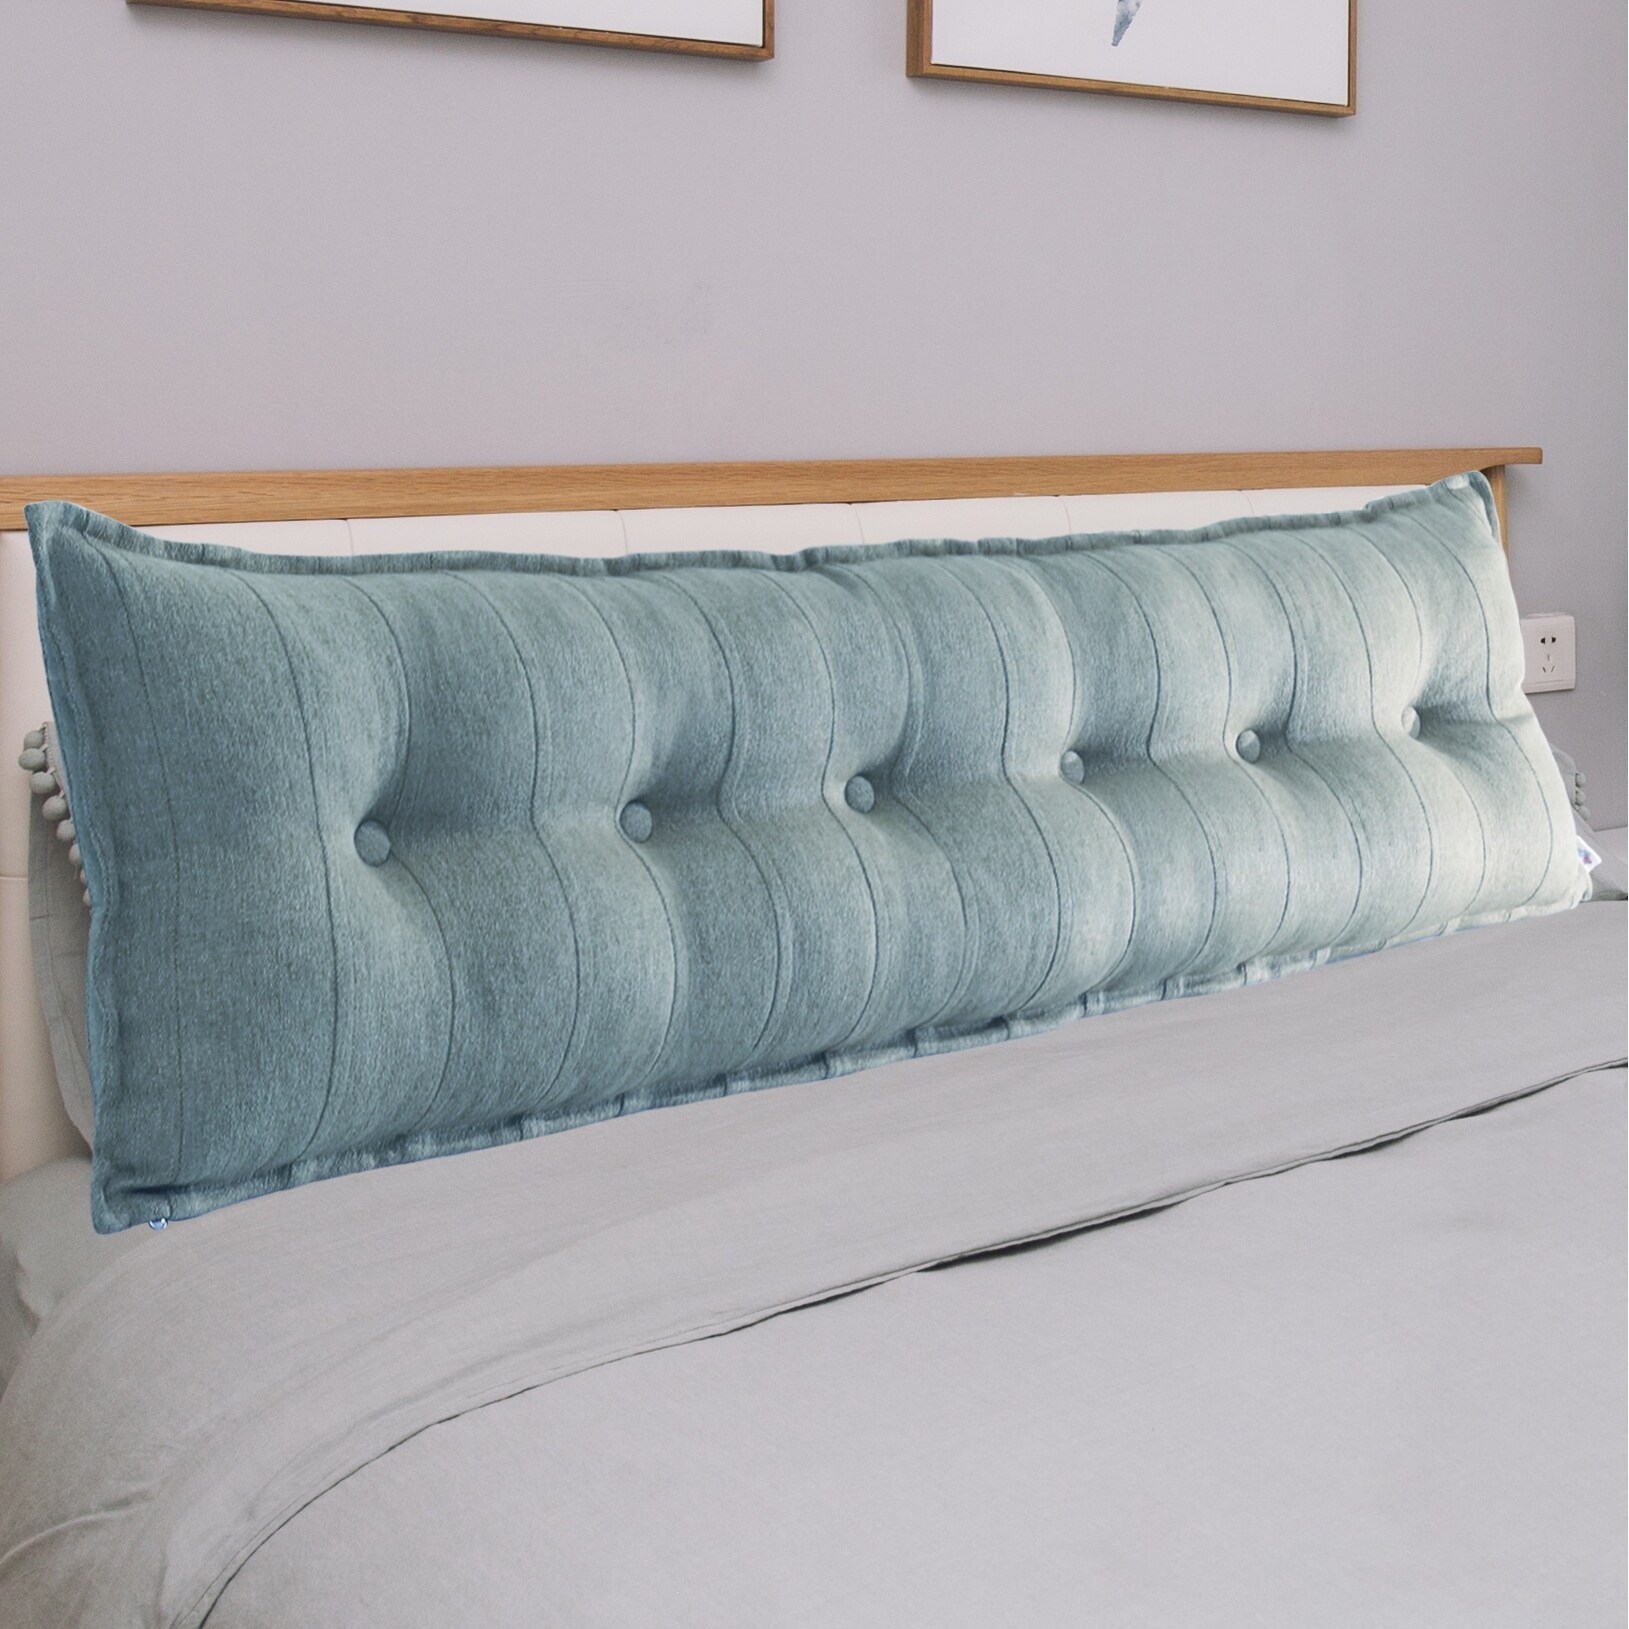 https://ak1.ostkcdn.com/images/products/is/images/direct/b5ff284ac194db5db12301c01b0ace293a5eede8/WOWMAX-Button-Tufted-Body-Pillow-Bed-Rest-Decrative-Reading-Pillow-Lumbar-Pillow.jpg